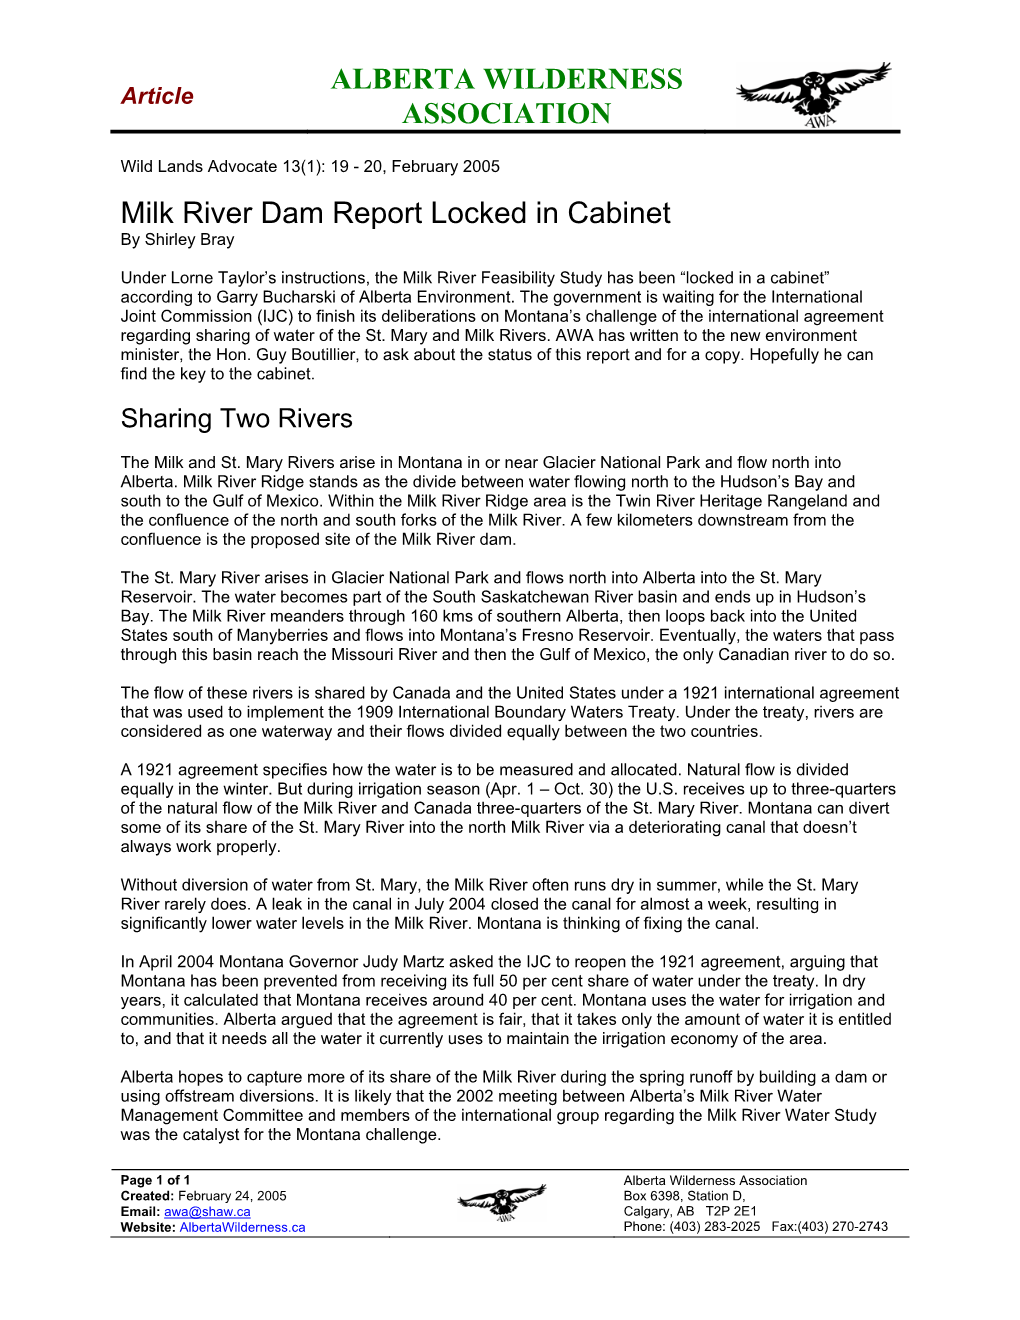 Milk River Dam Report Locked in Cabinet by Shirley Bray